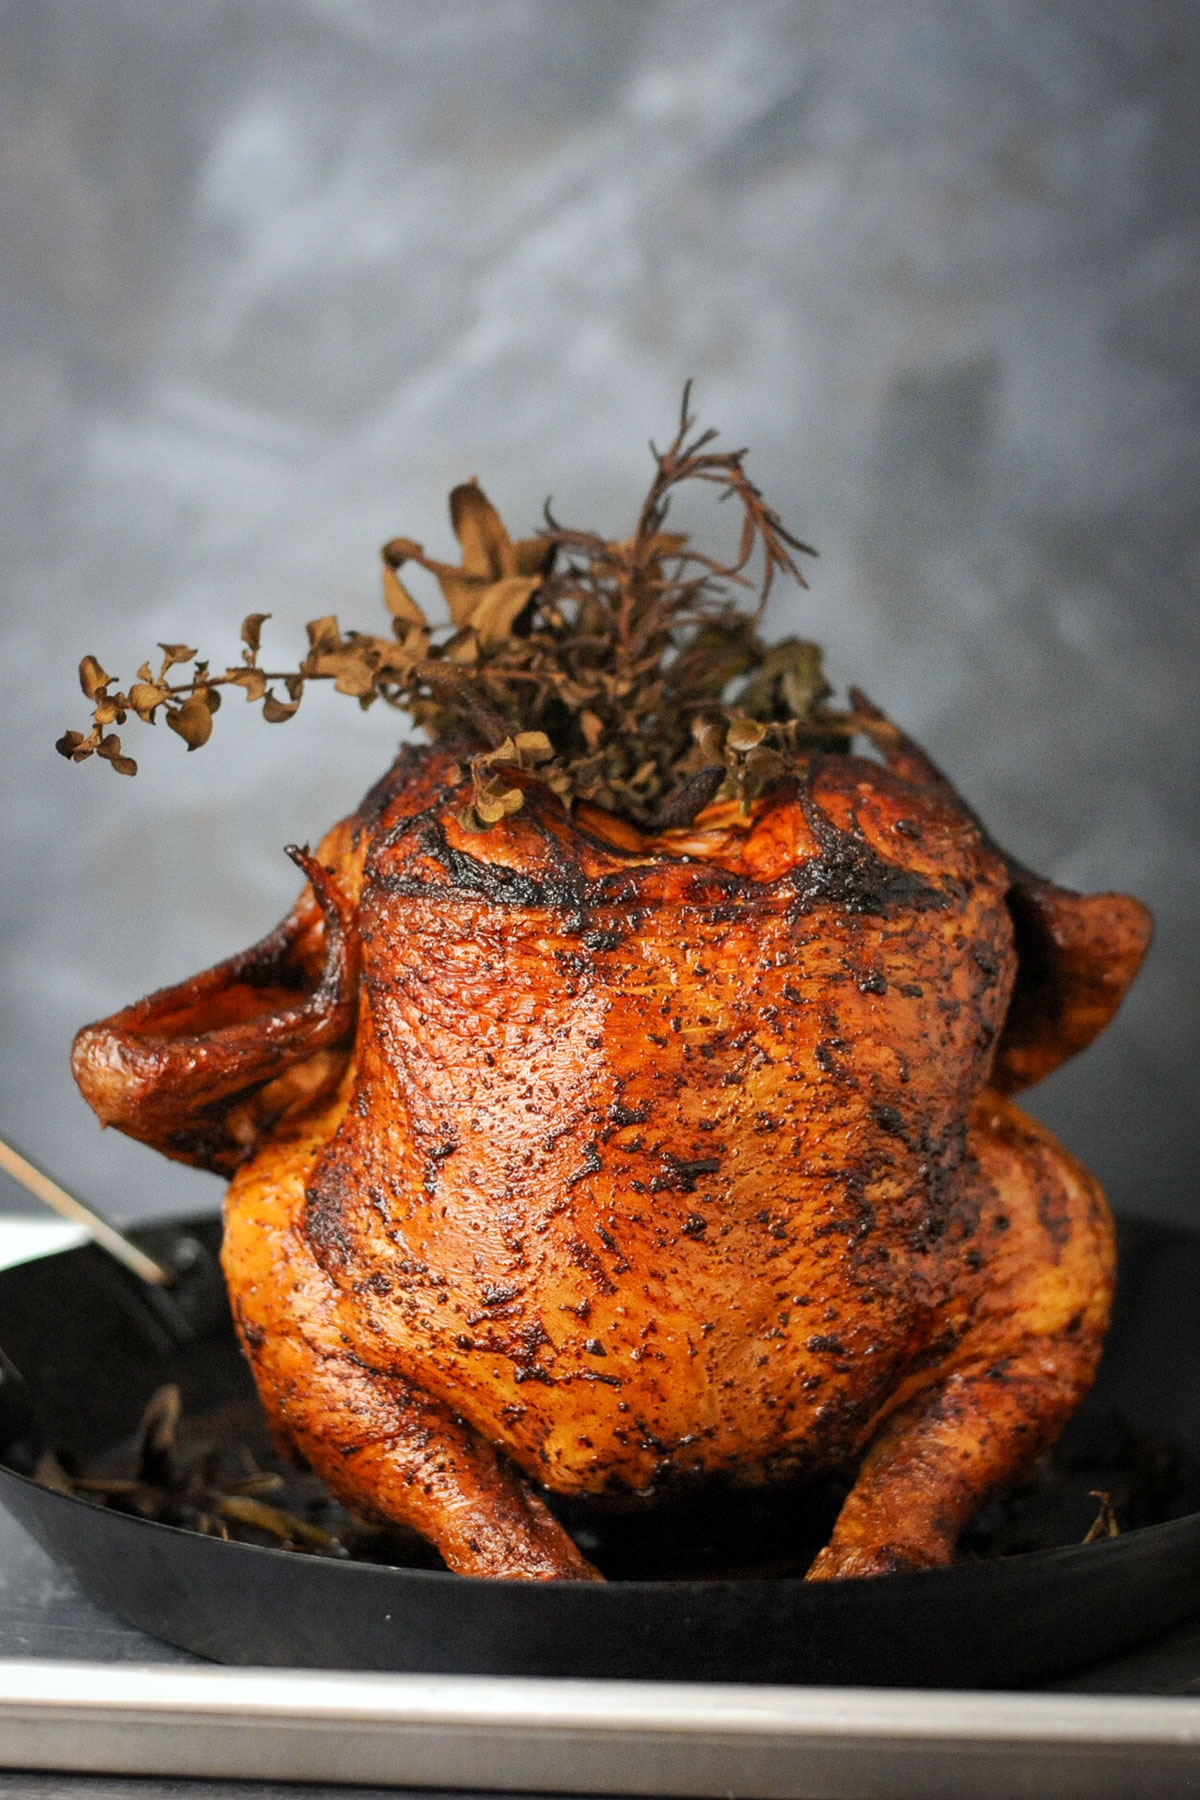 Smoked chicken stuffed with herbs. 